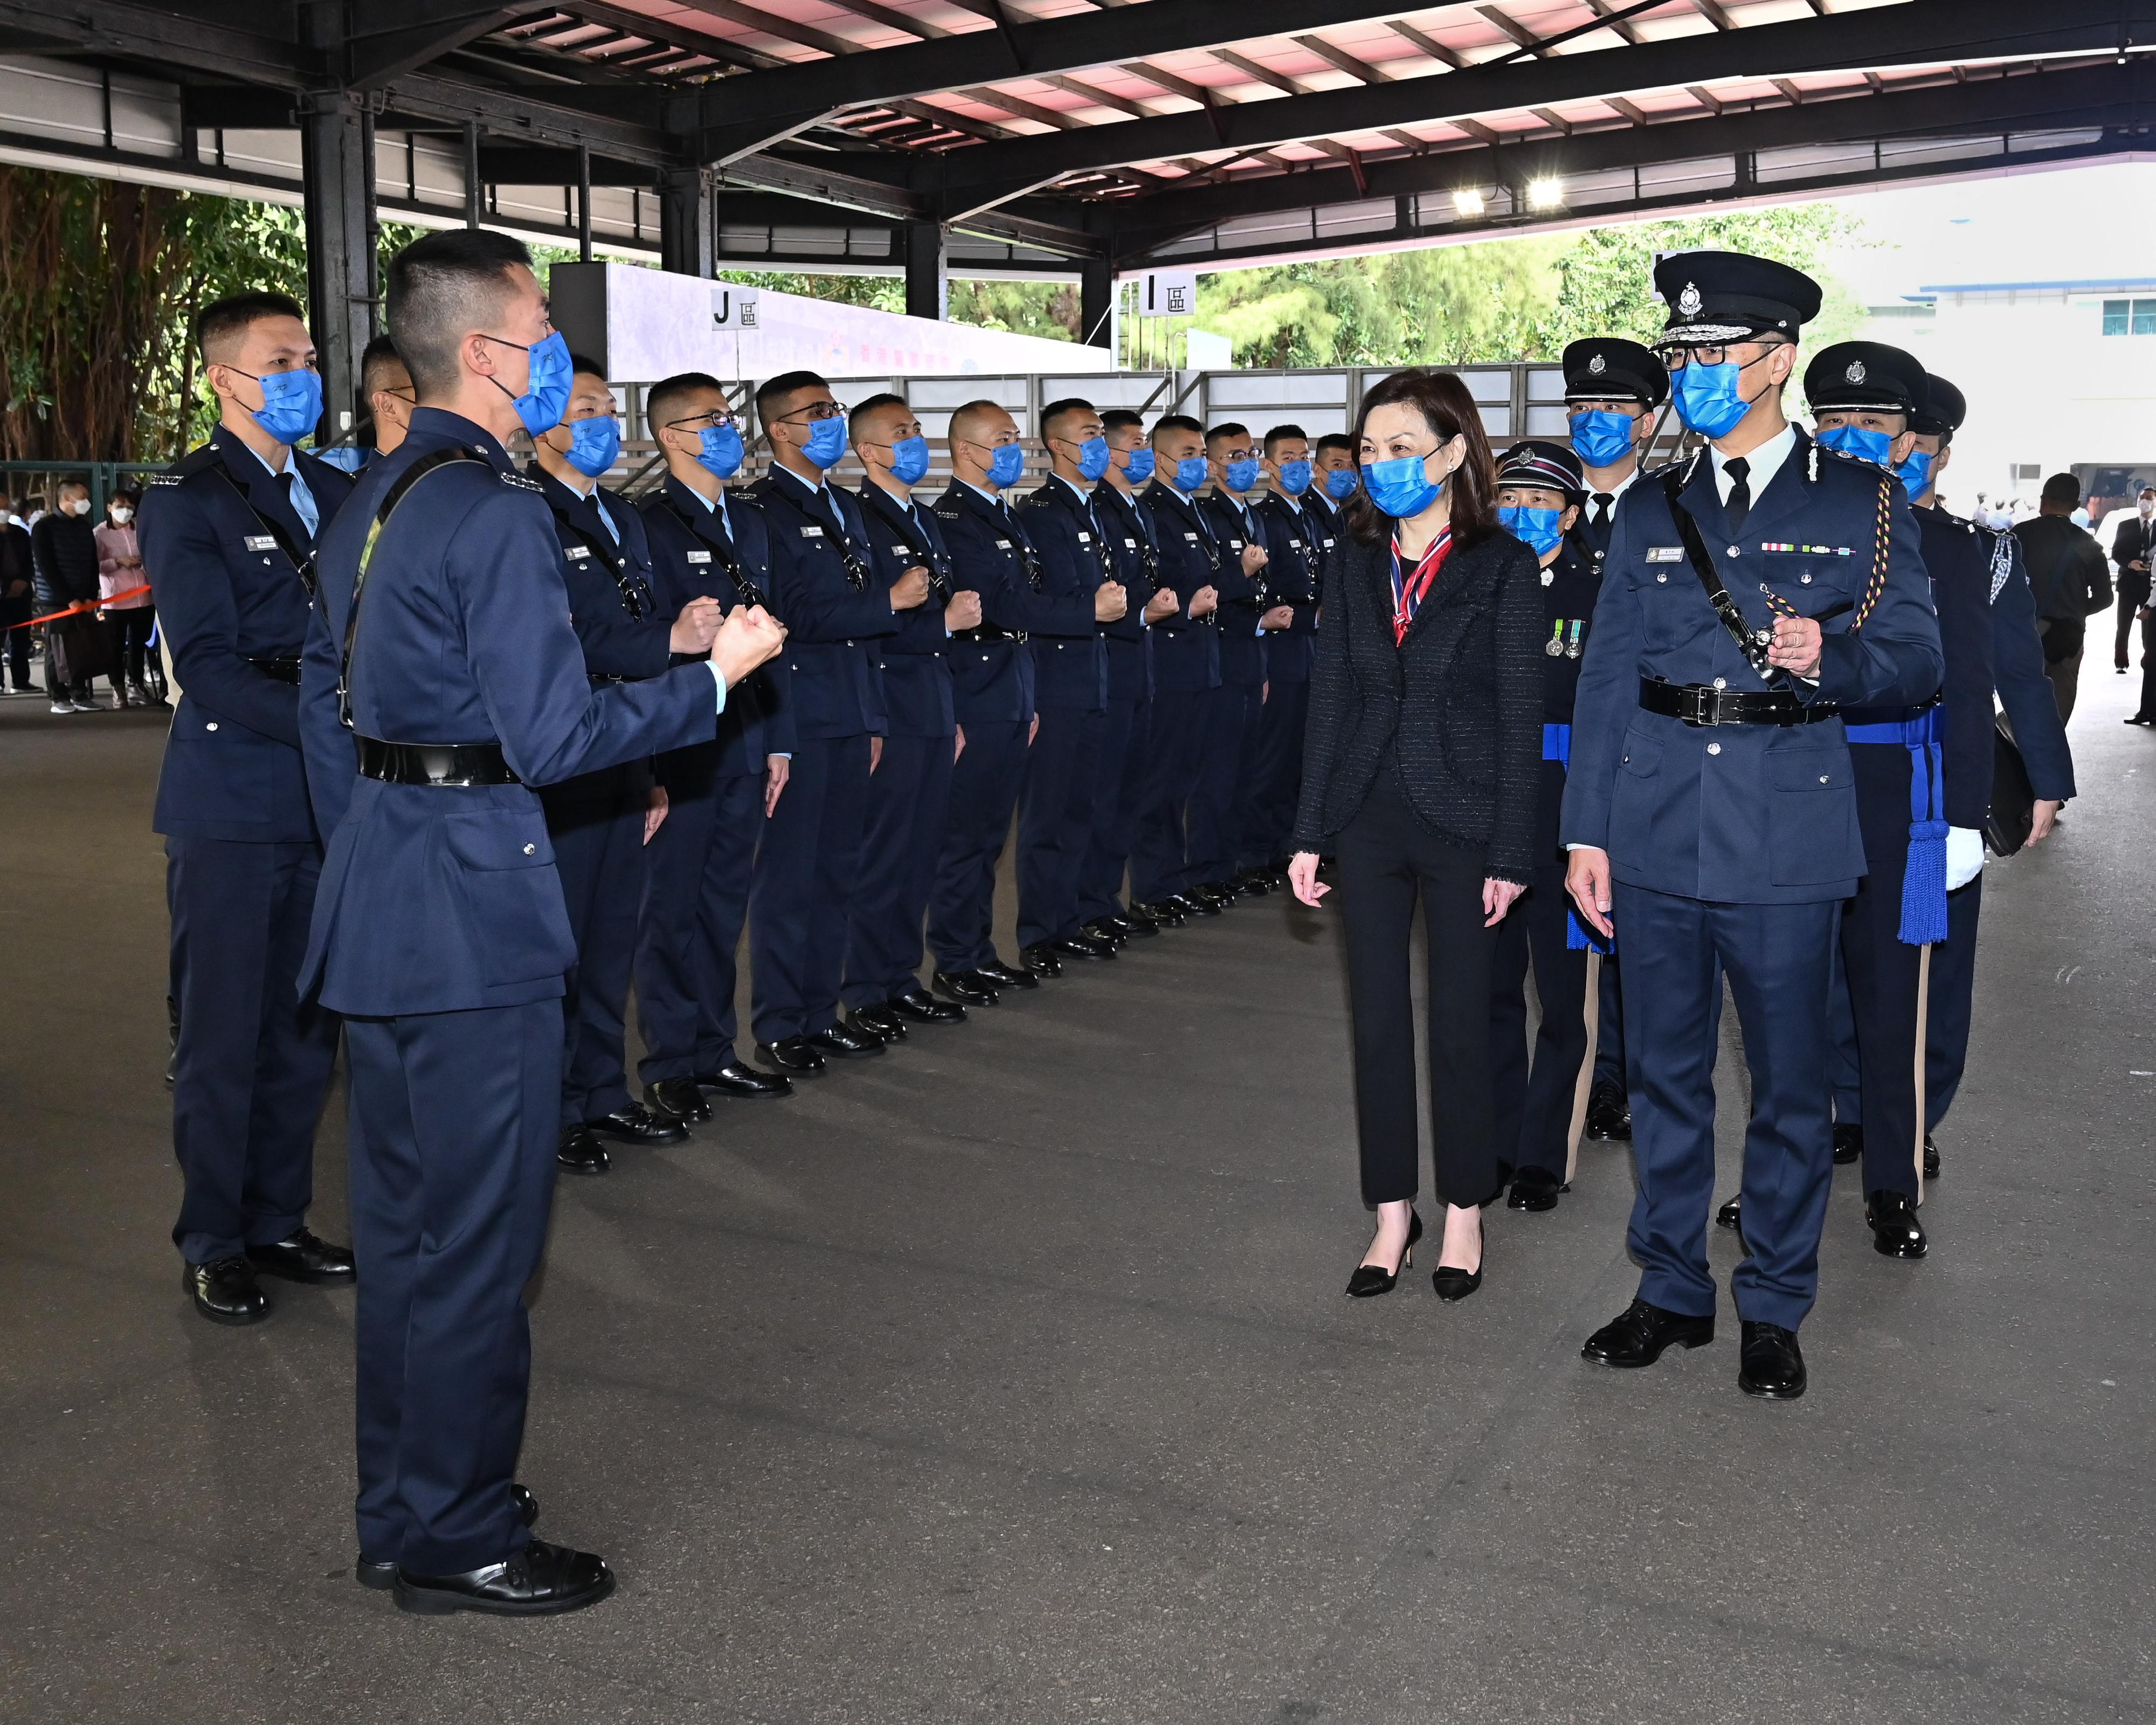 The Chairman of the Independent Police Complaints Council, Ms Priscilla Wong Pui-sze (second right), accompanied by the Commissioner of Police, Mr Siu Chak-yee (first right), meets graduates after the passing-out parade held at the Hong Kong Police College today (February 11).